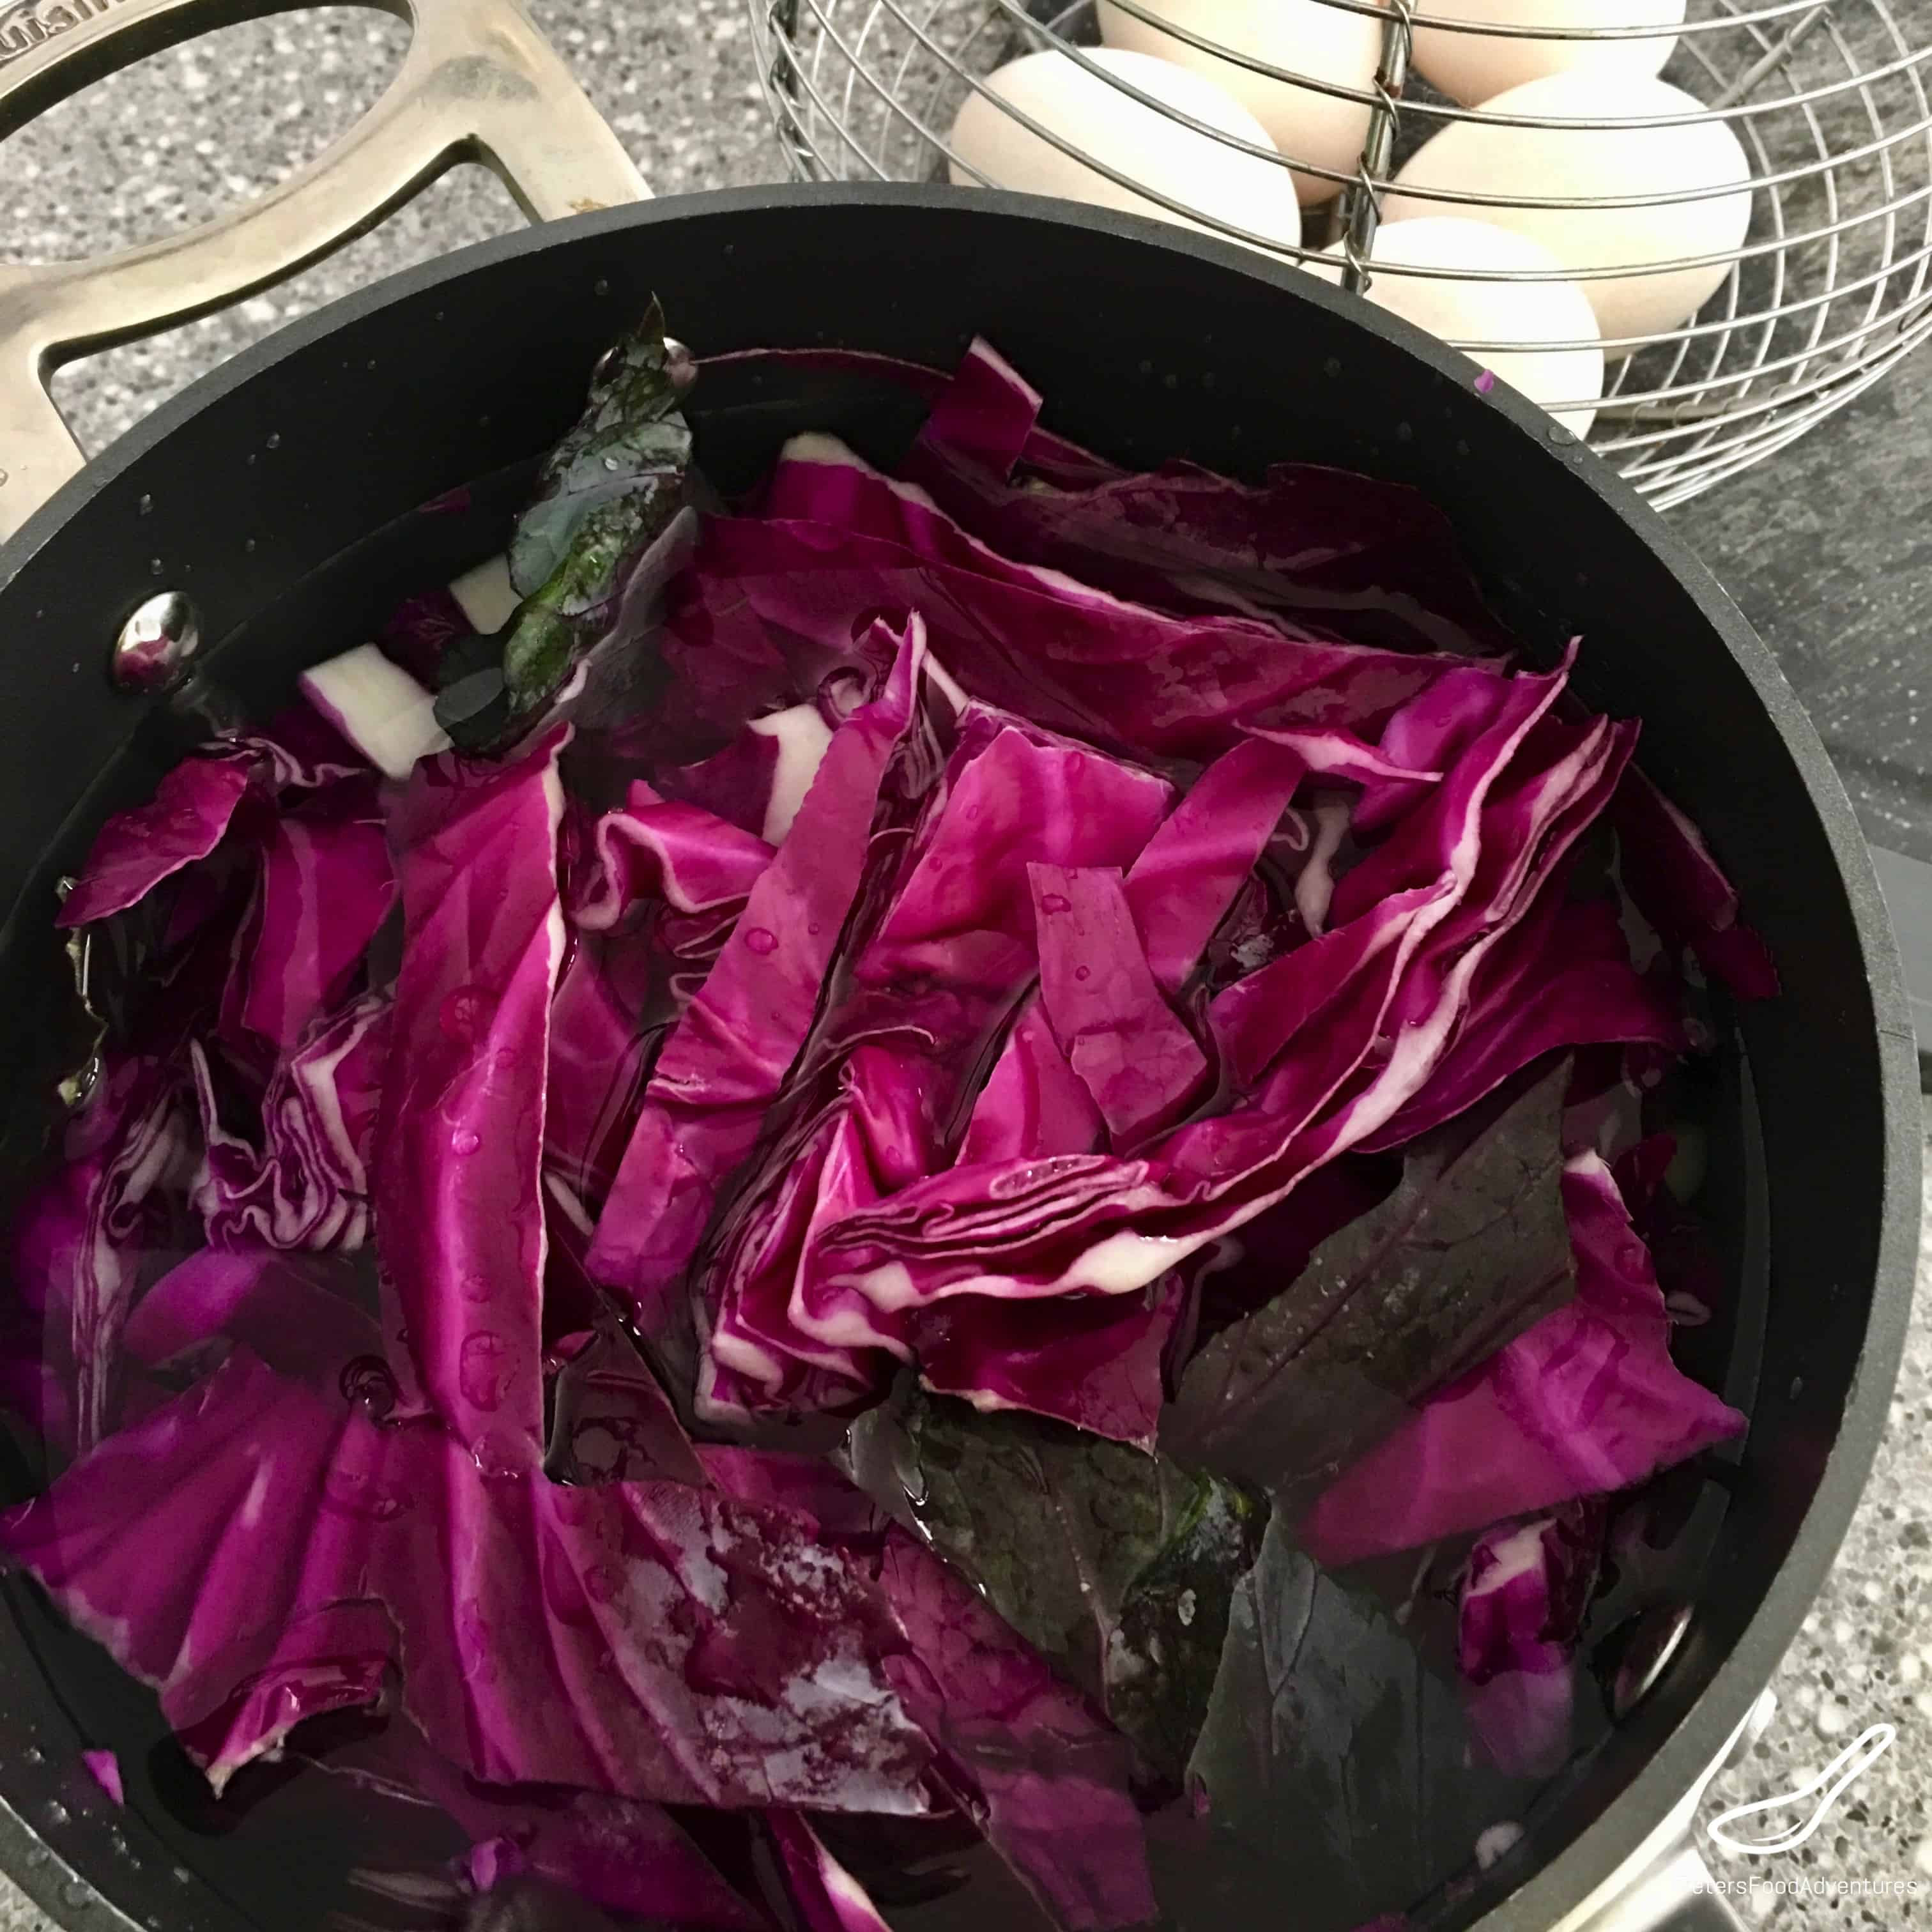 preparing blue dye from red cabbage